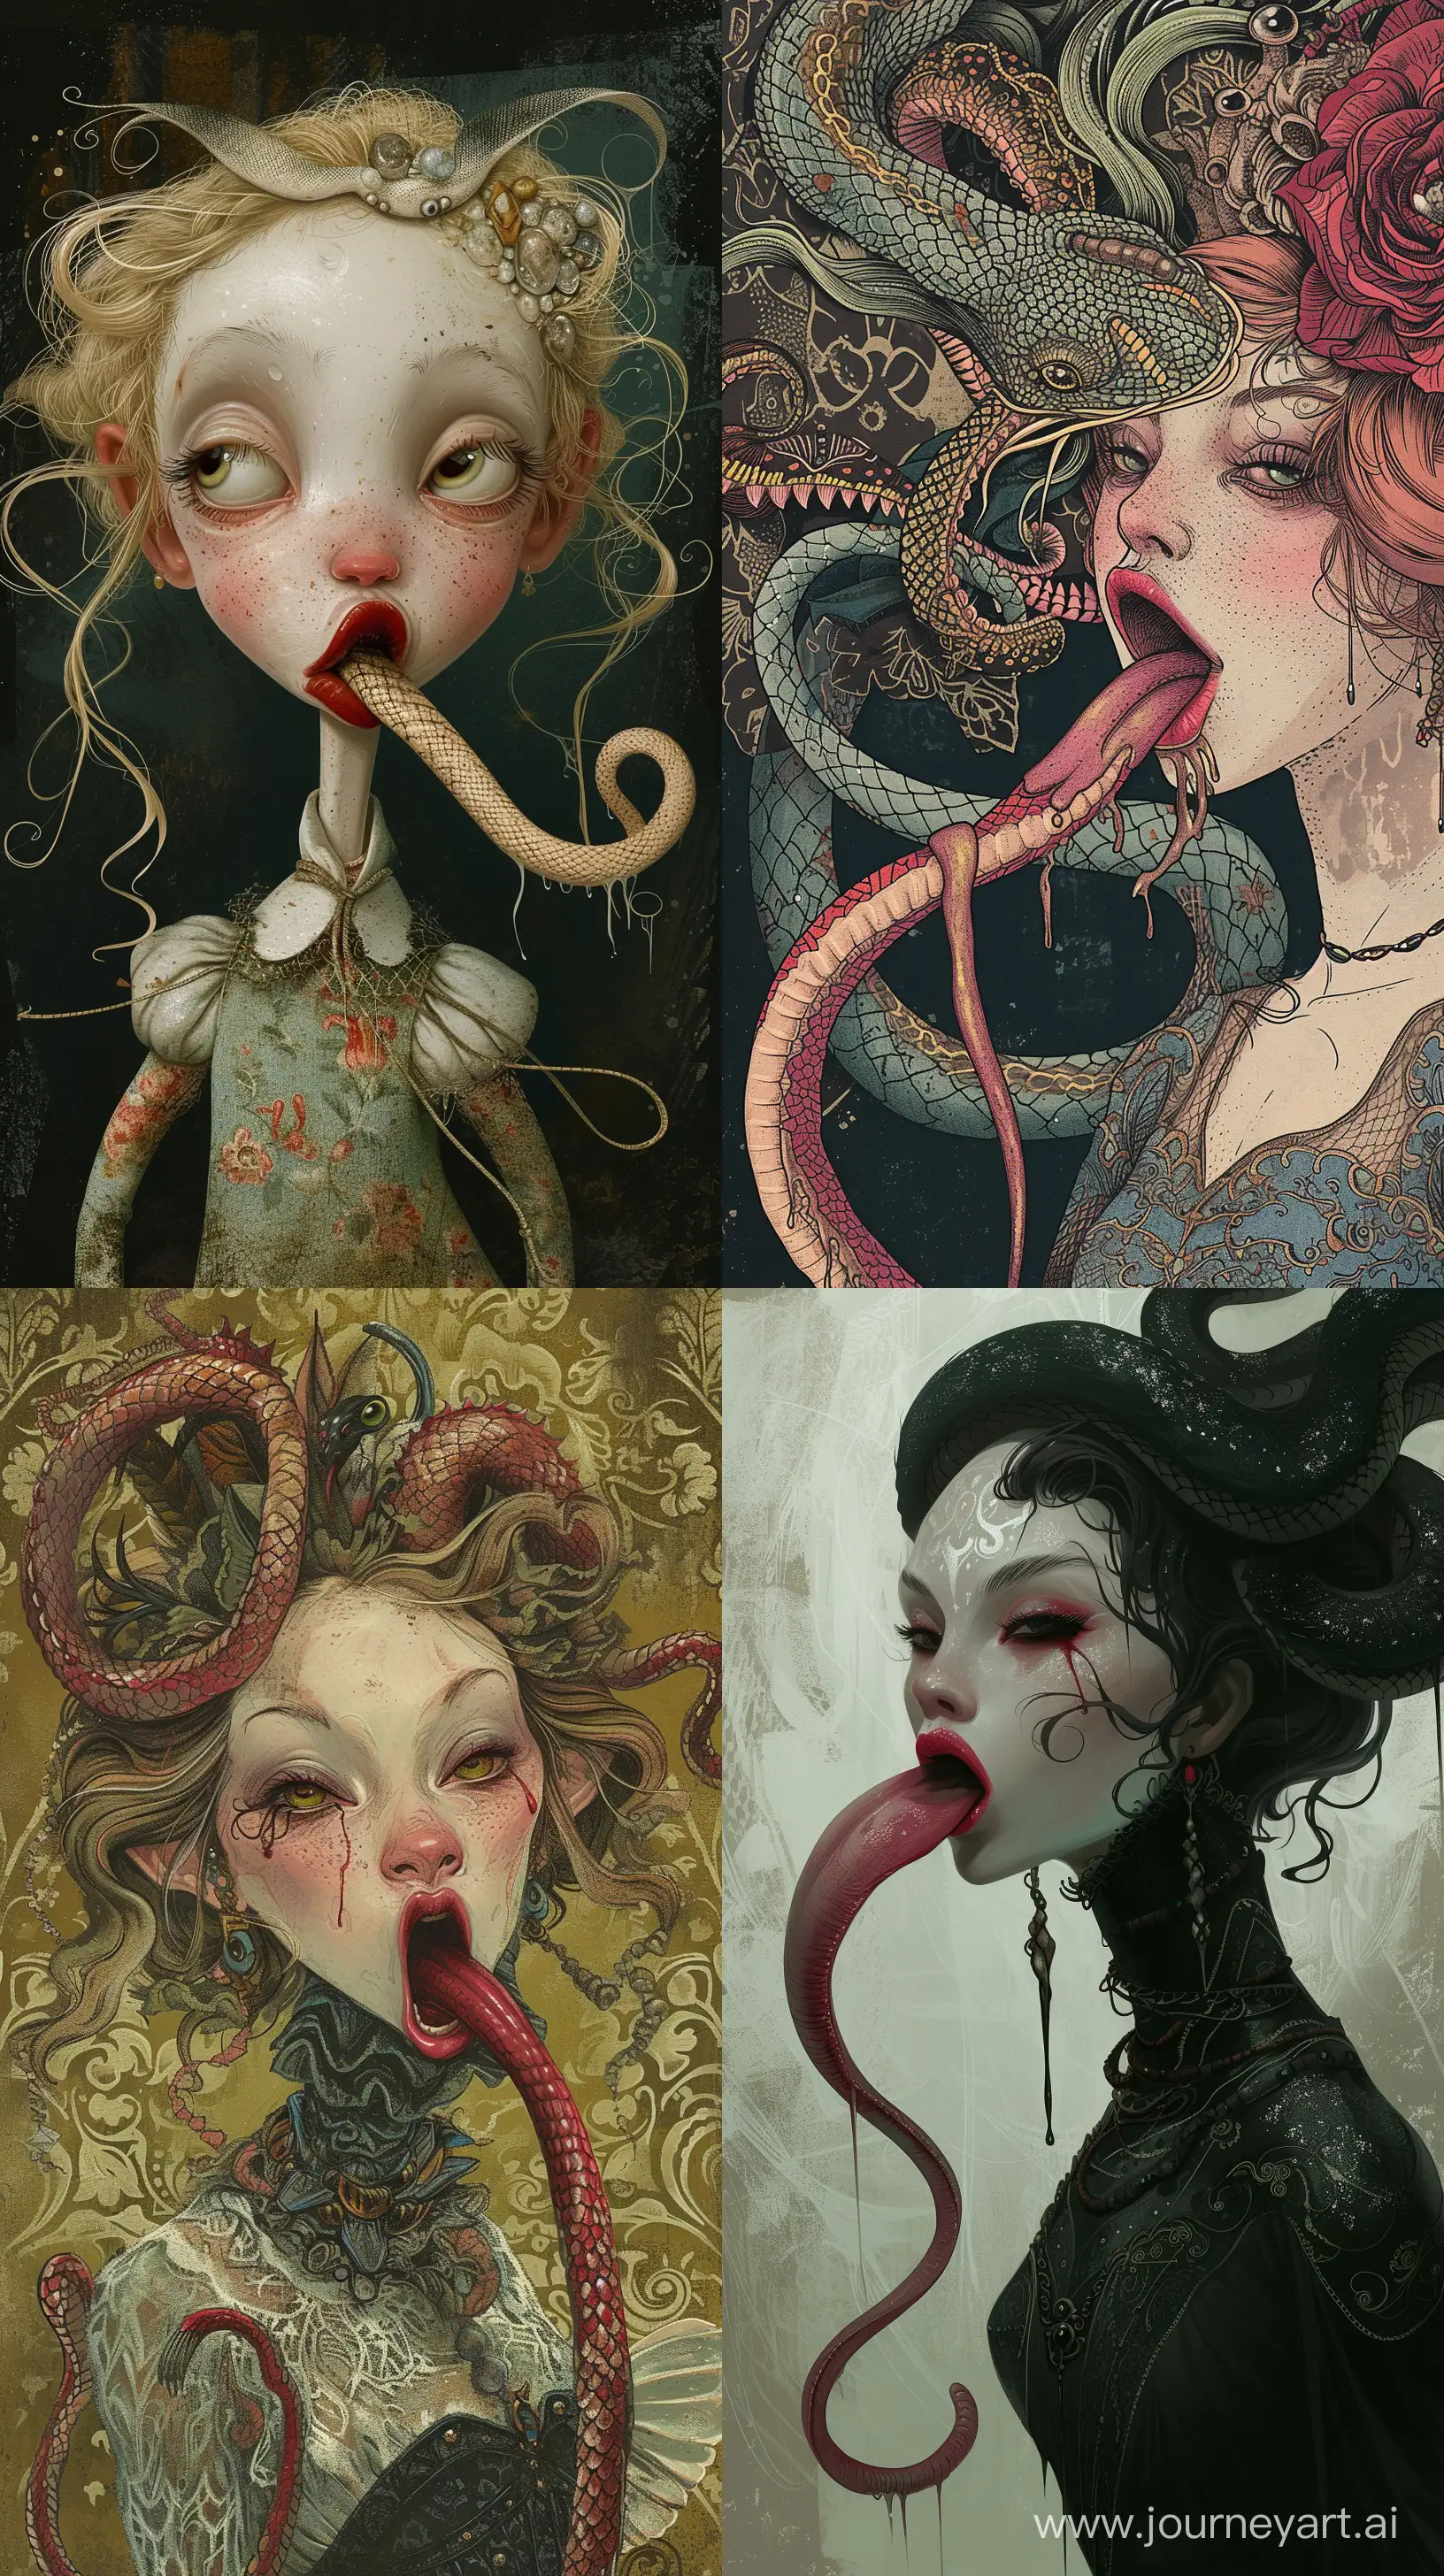 Messy devouring princess with long serpentine tongue, whimsical illustrations --ar 9:16